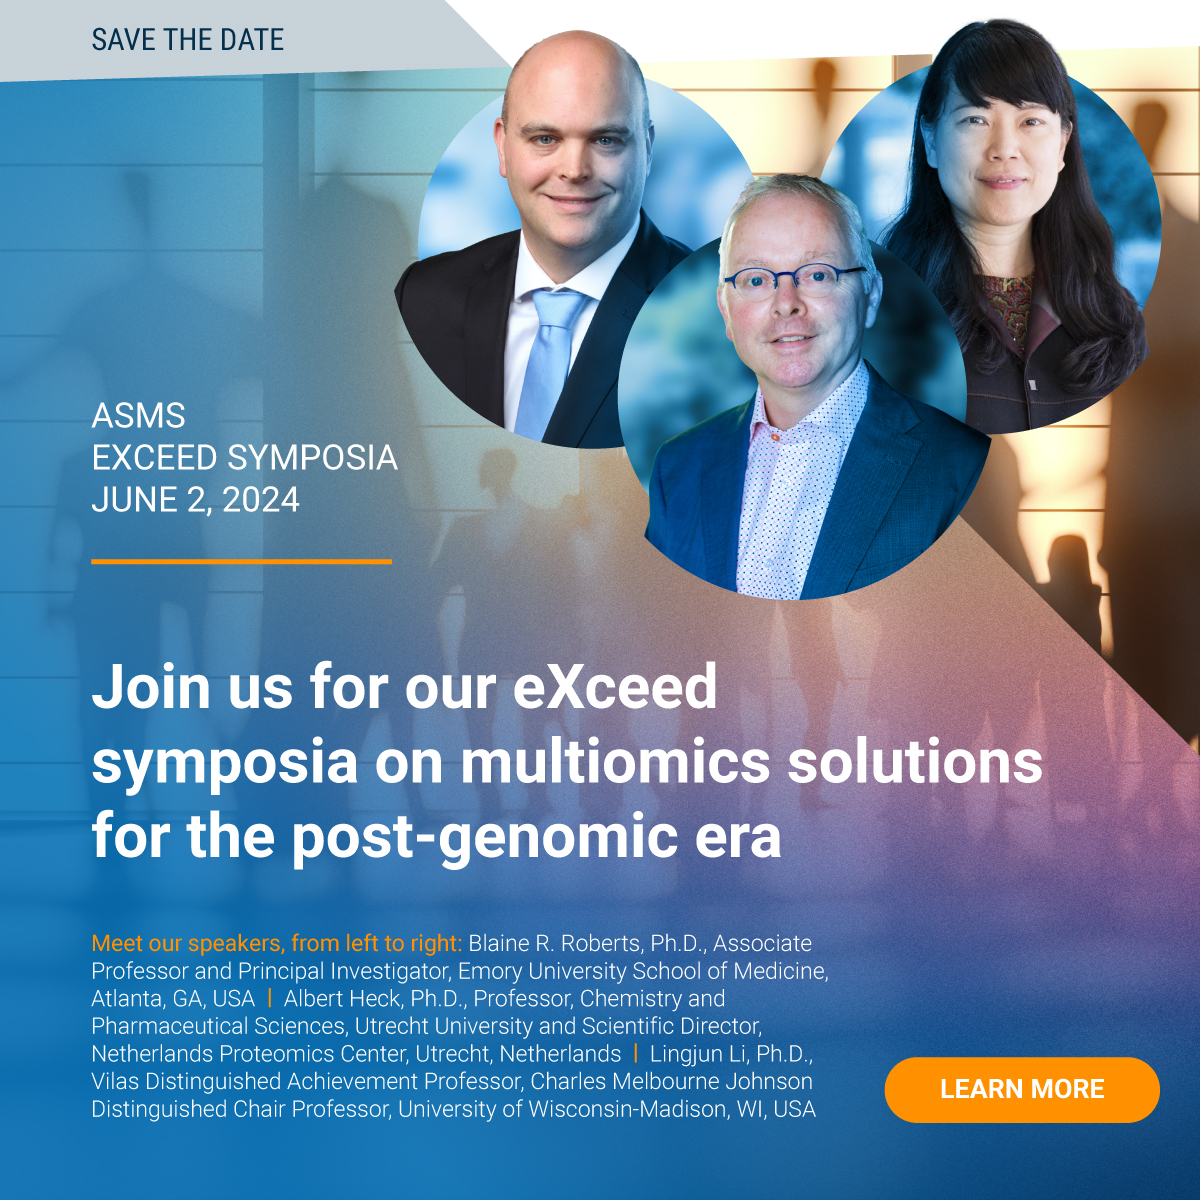 We are so excited about the key speakers at our eXceed Symposia: Albert Heck, Blaine Roberts and Lingjun Li will kick-off our activites at #asms2024! Register now and be the first to hear about the newest advancements in #MassSpec: goto.bruker.com/3vZgK3o @asmsnews #multiomics